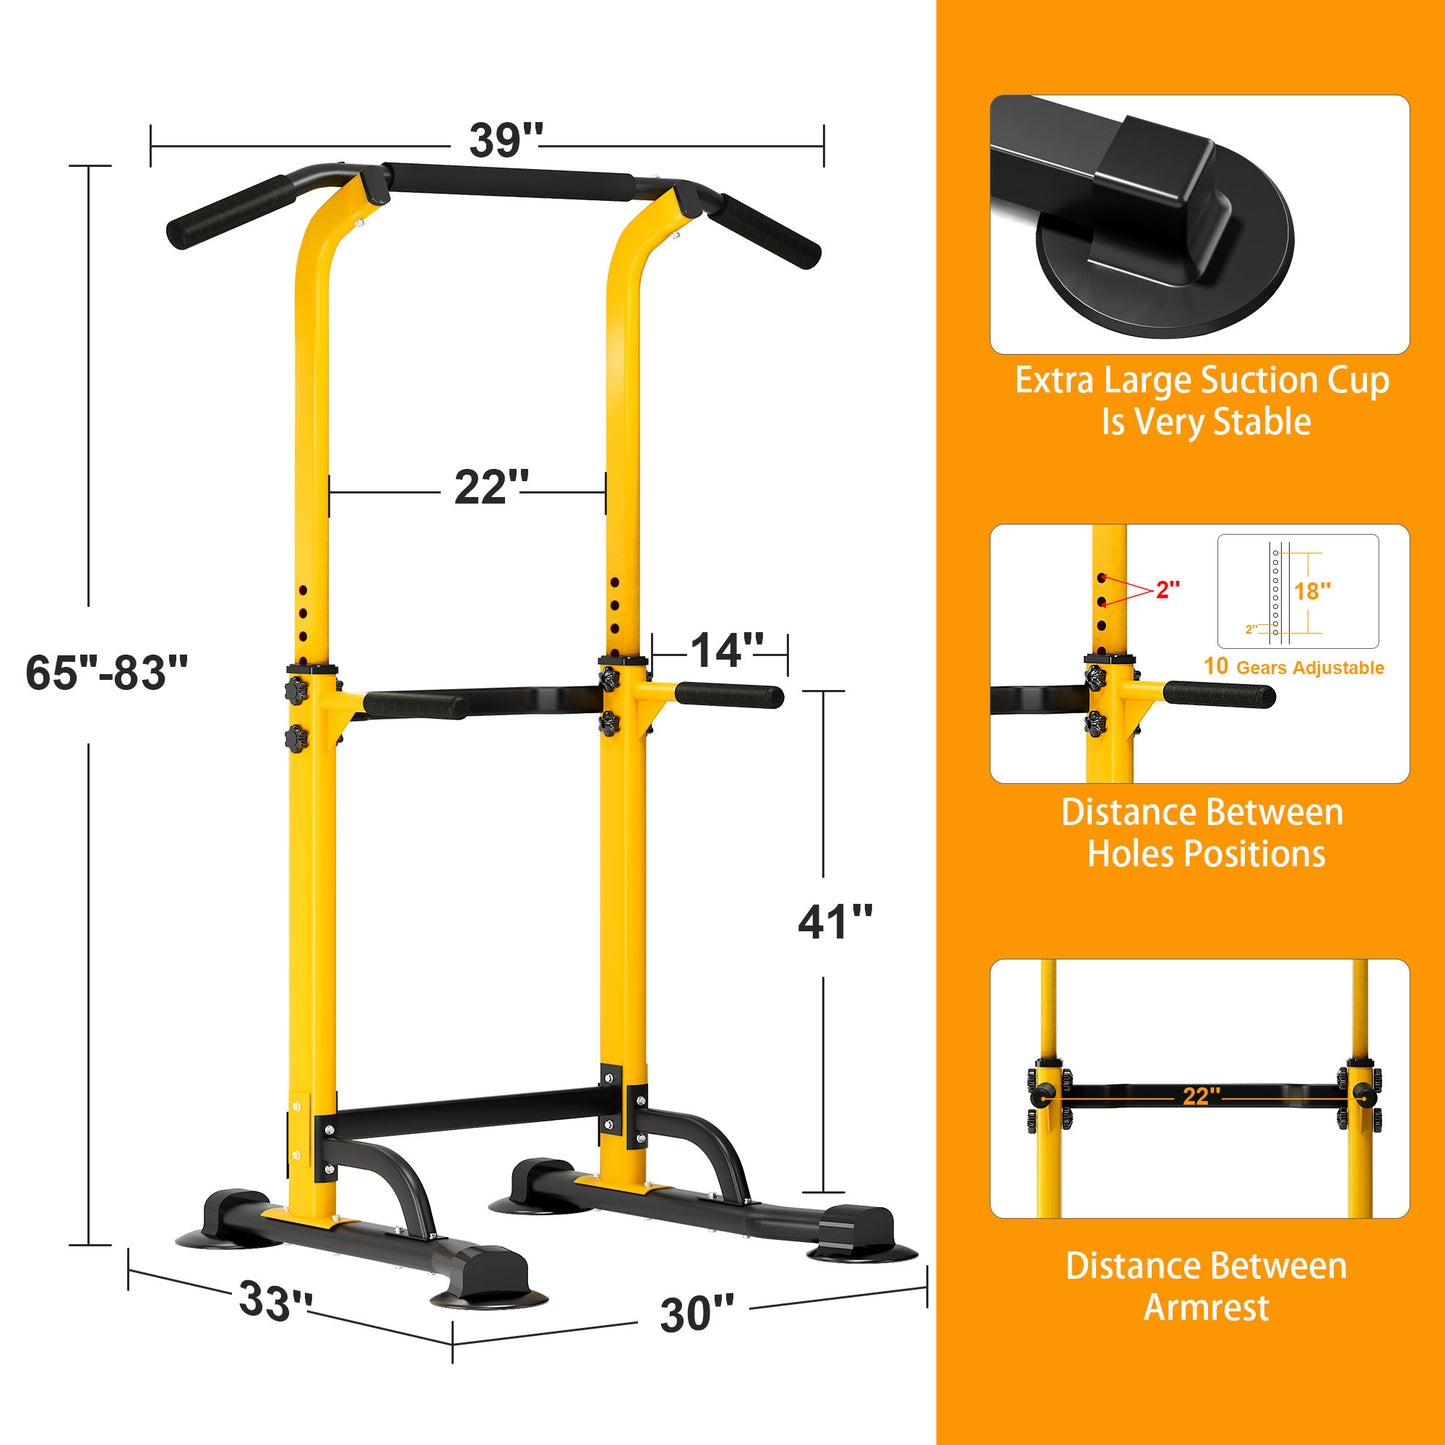 SogesPower Adjustable 82.7"H Pull up Bar Power Tower Multifunctional Fitness Station for Home